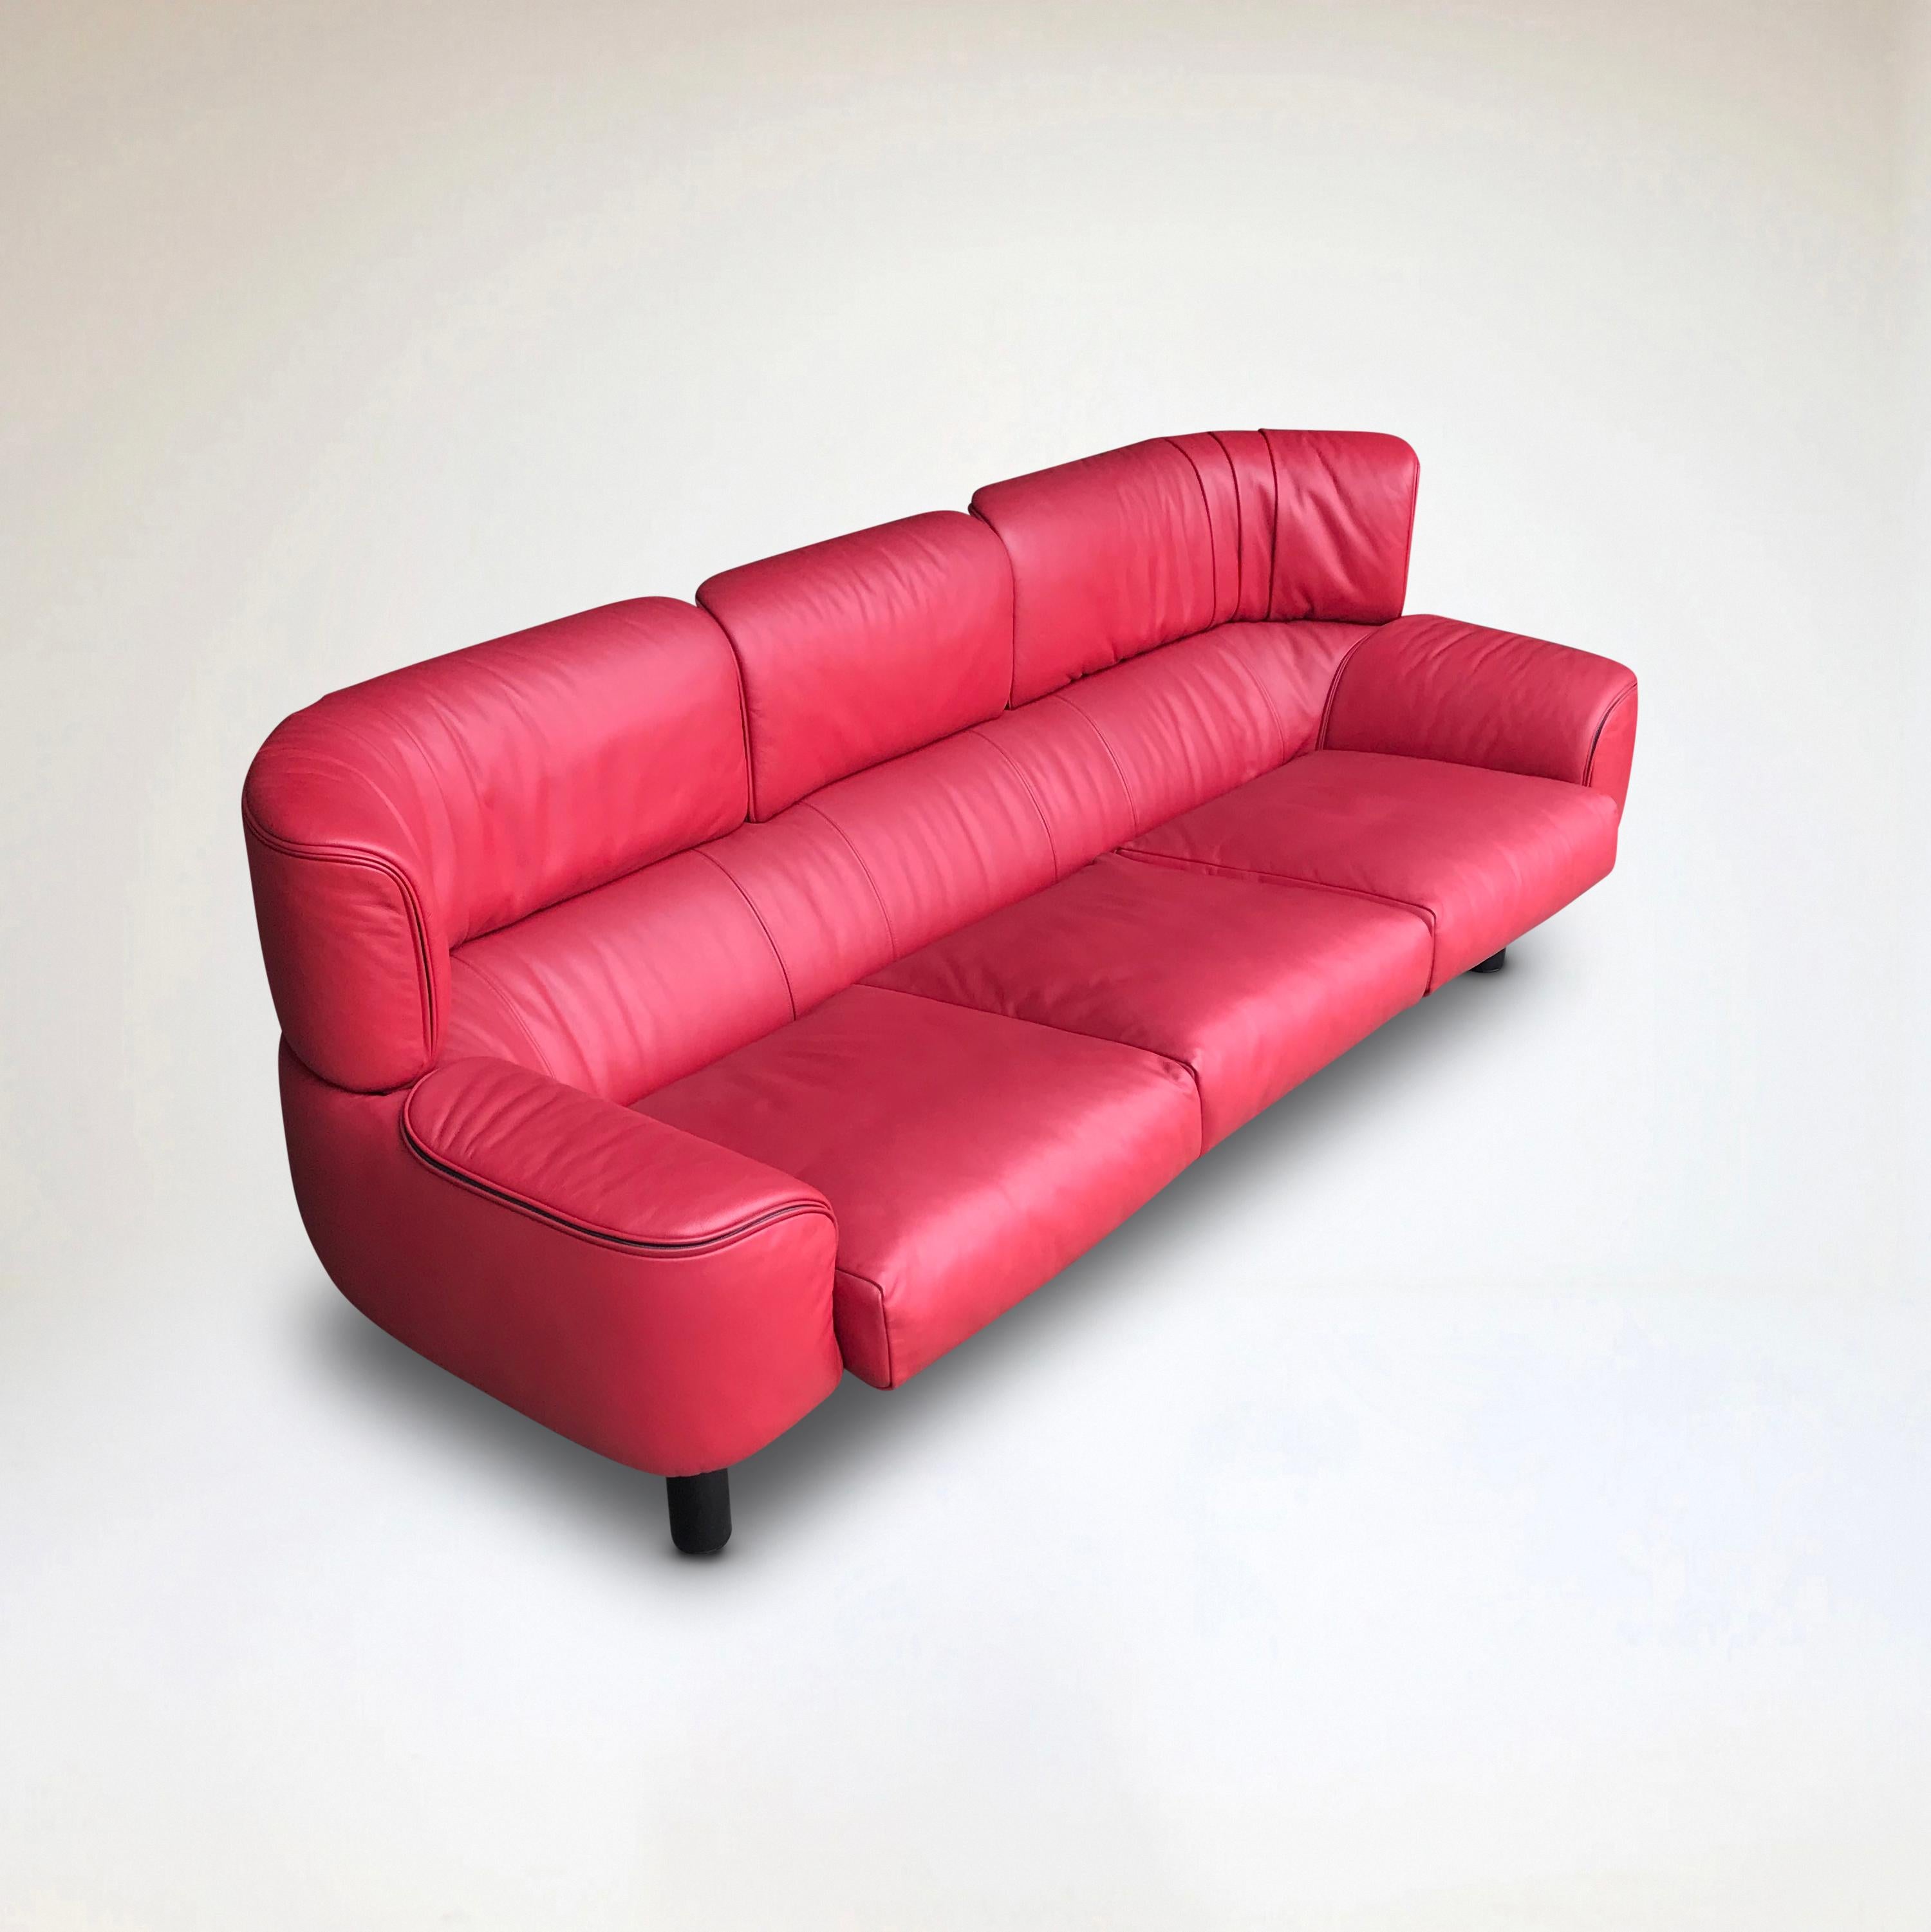 Bull 3-seater red leather sofa by Gianfranco Frattini for Cassina 1987 For Sale 3